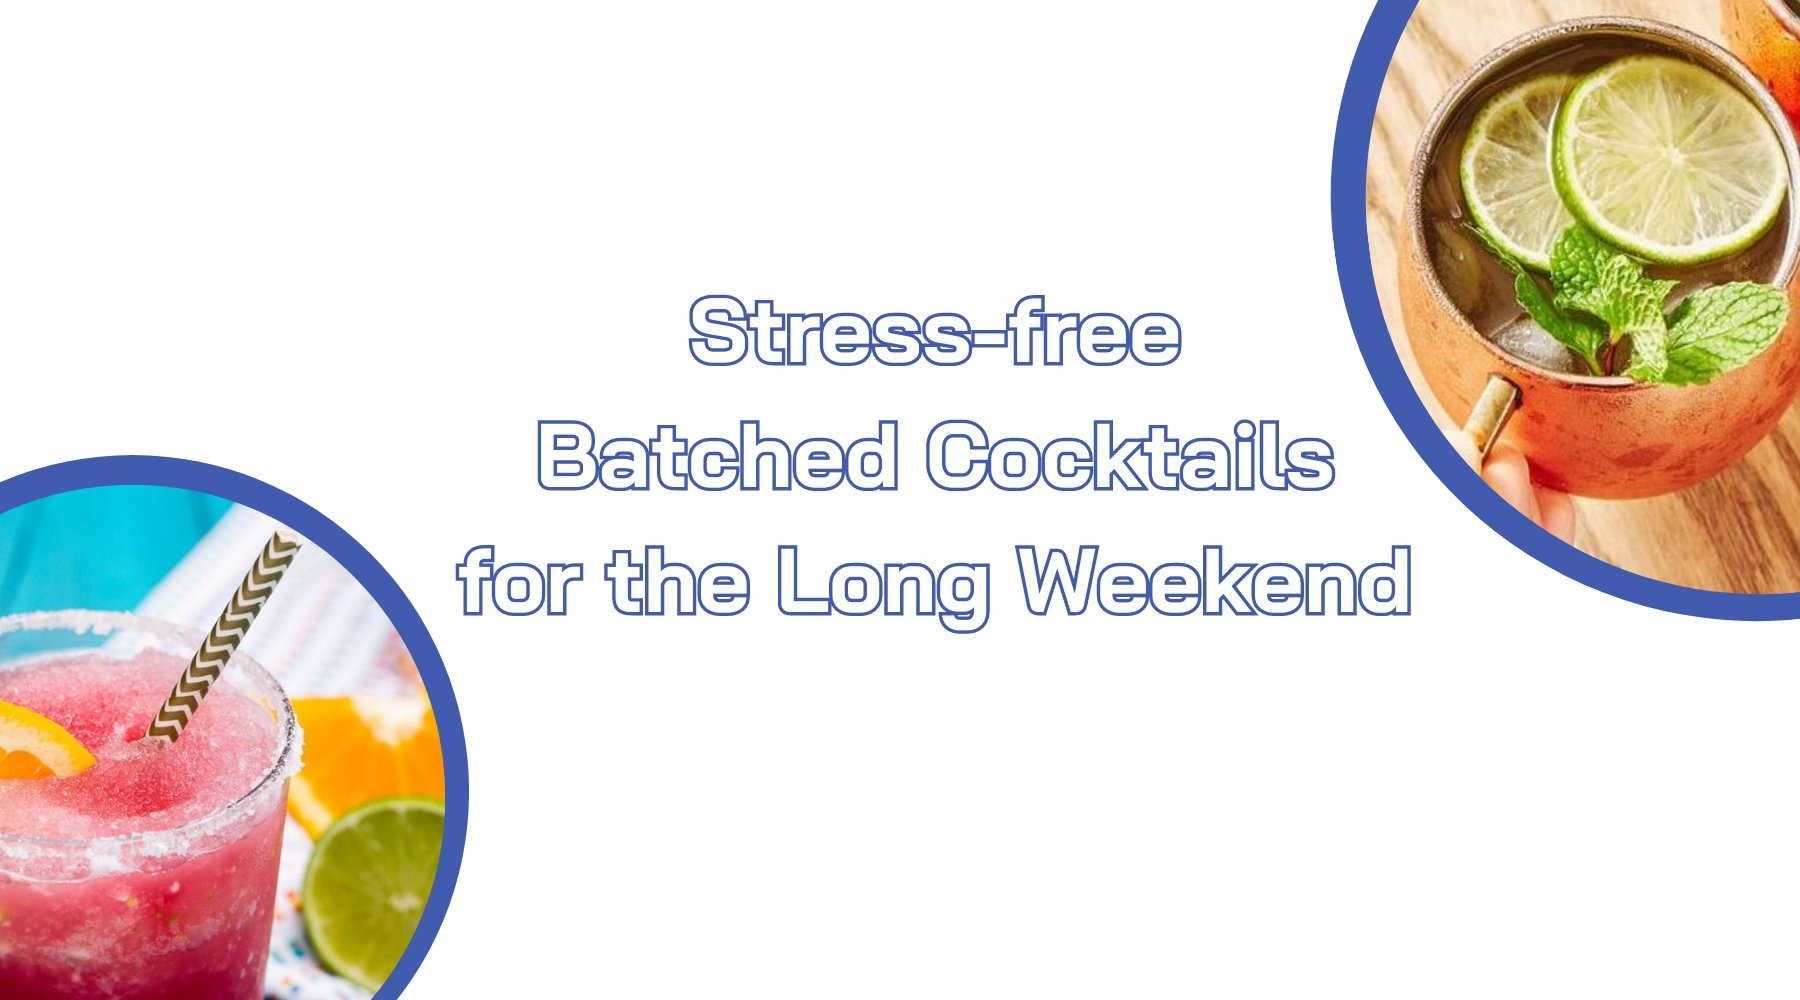 Stress-free Batched Cocktail Recipes for the Long Weekend - Views Balcony Bar | Turn your Balcony into a Bar!